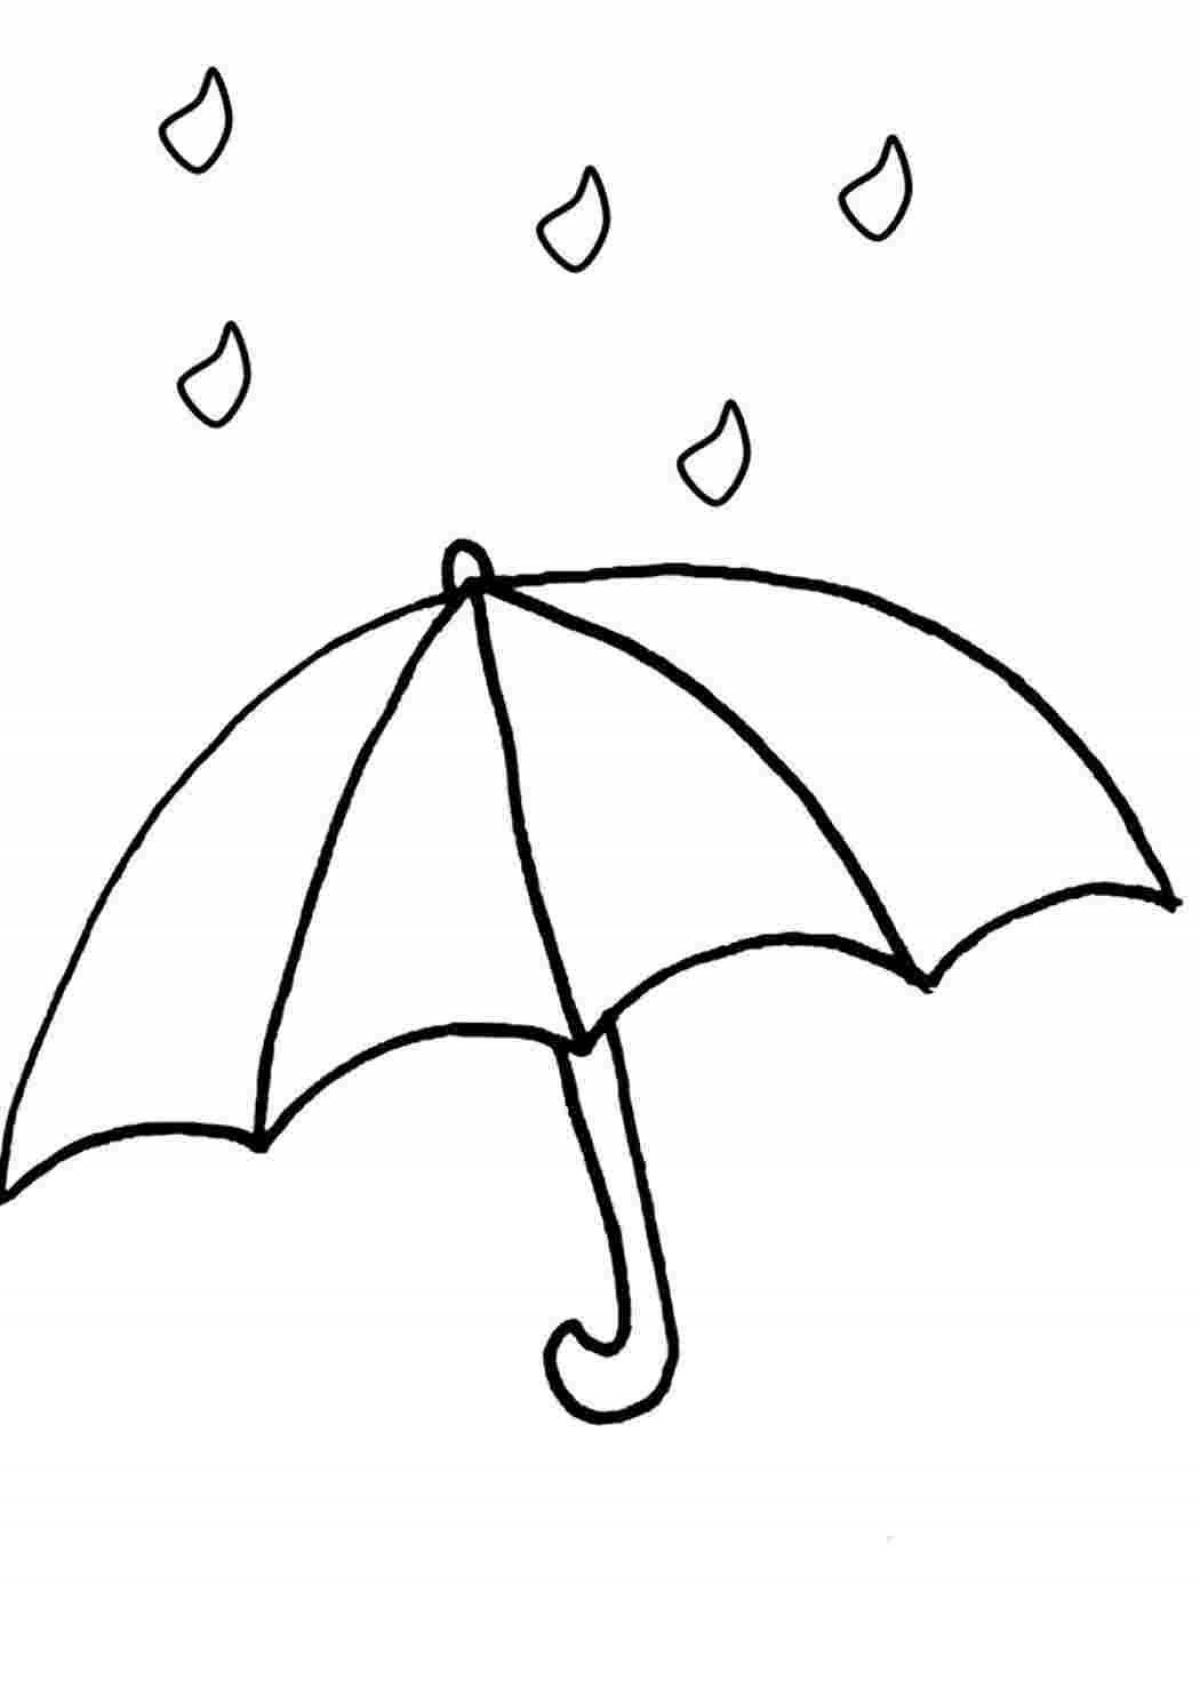 Coloring book umbrella with colorful hearts for children 3-4 years old